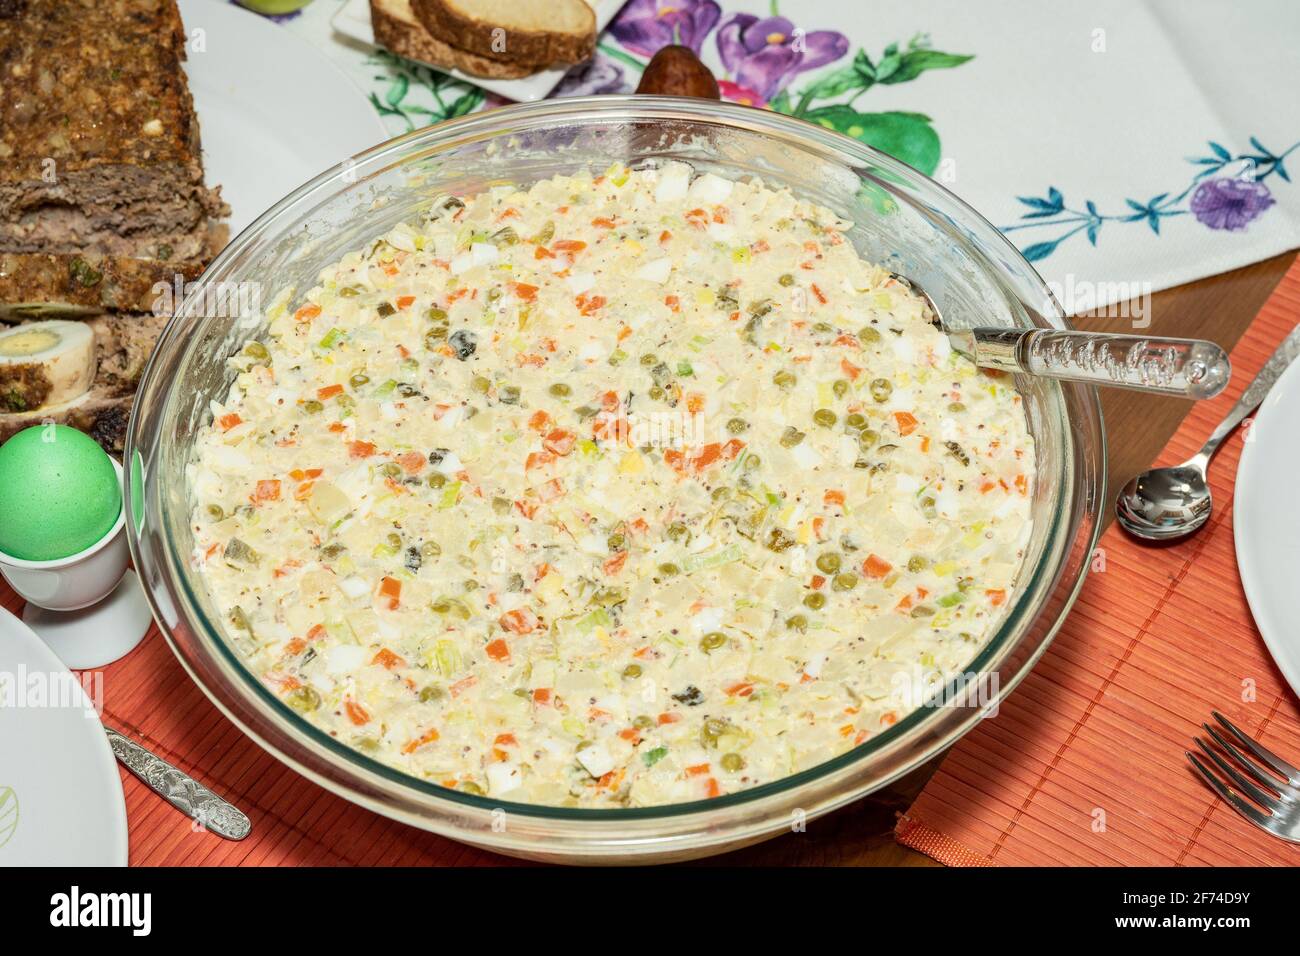 Salade Olivier is a salad composed of diced potato, vegetables, and sometimes meats bound in mayonnaise. Stock Photo